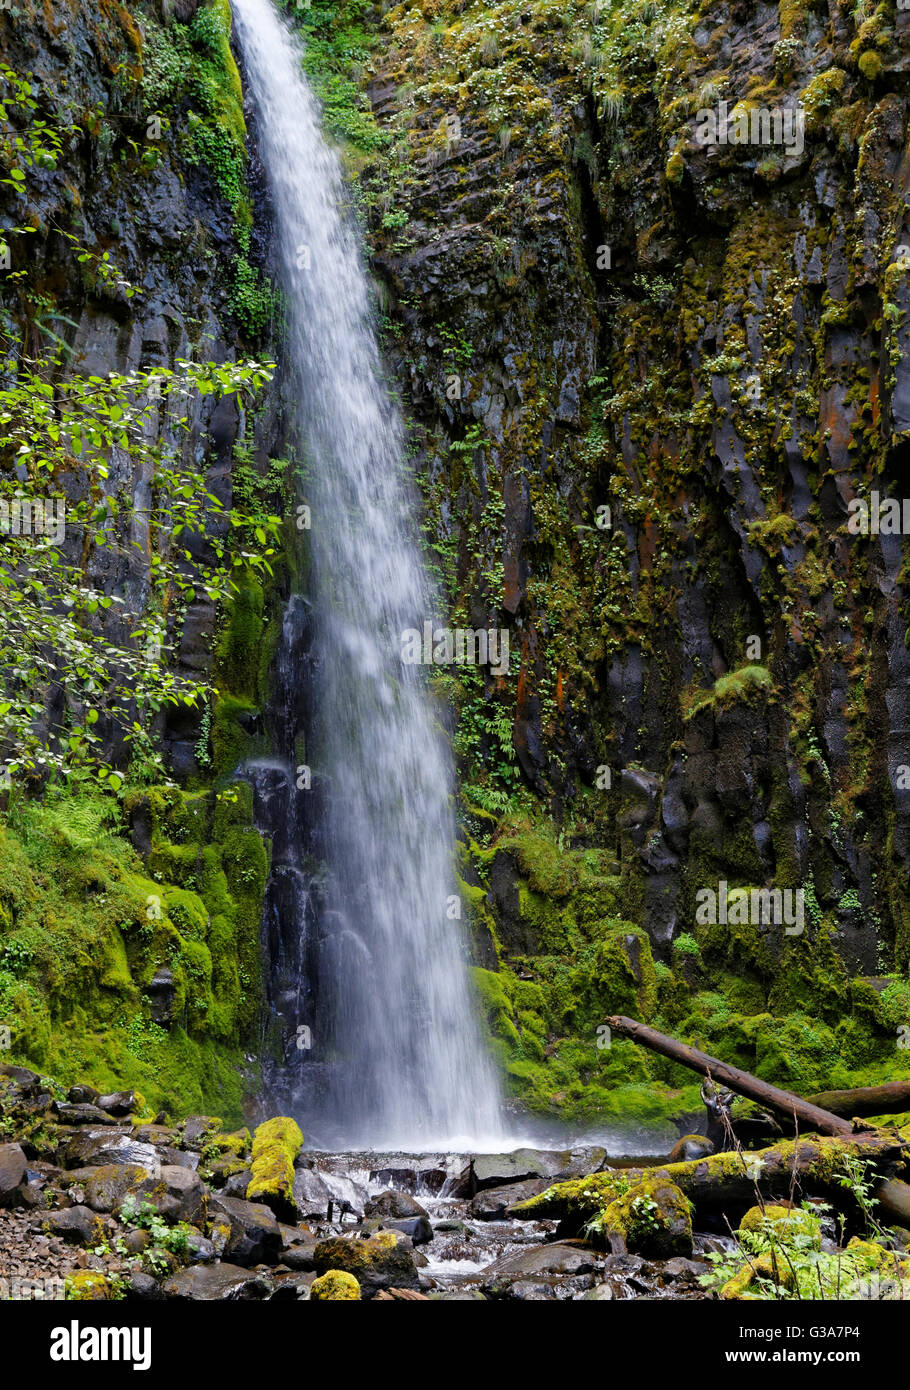 42,138.08945 Thirty 30 foot tall waterfall cascading over a basalt moss covered cliff into a pool of water below Stock Photo